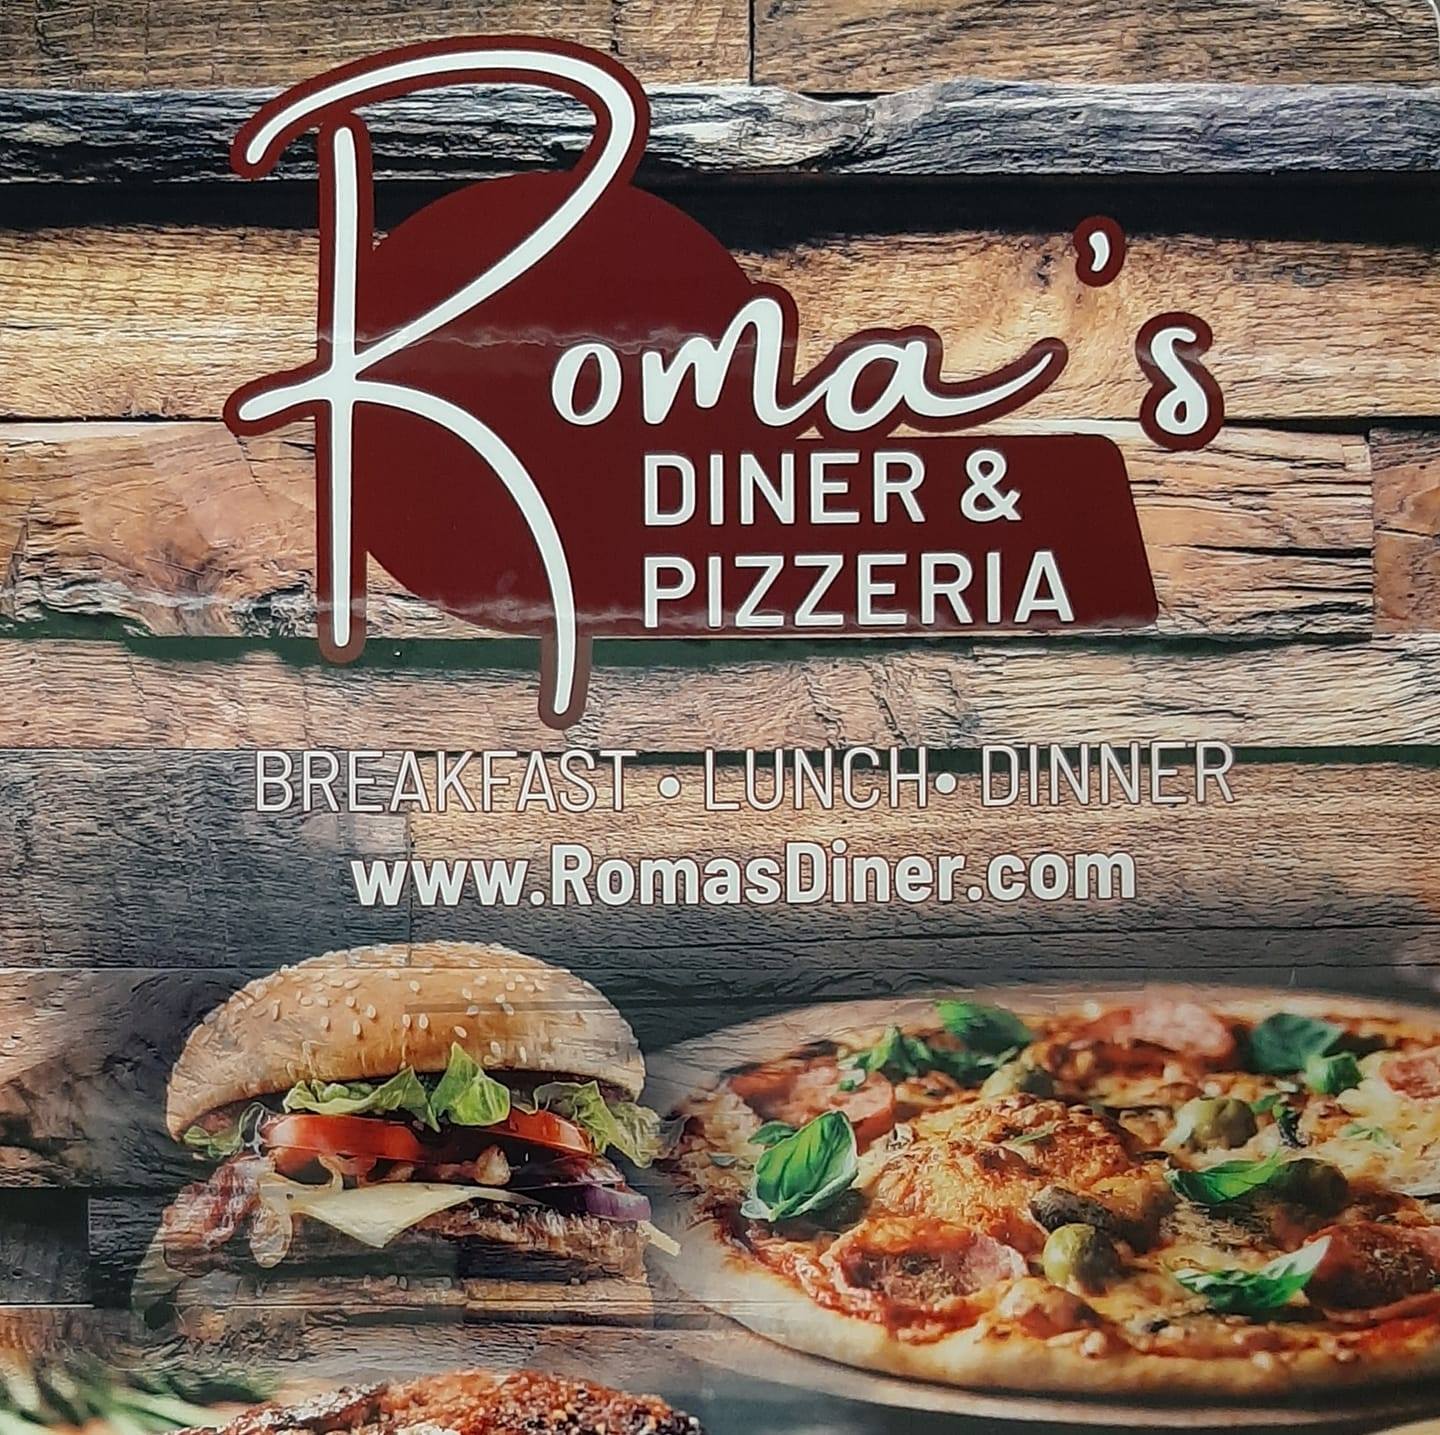 Roma's Diner and Pizzeria - Eastern Shore of Virginia Tourism Commission